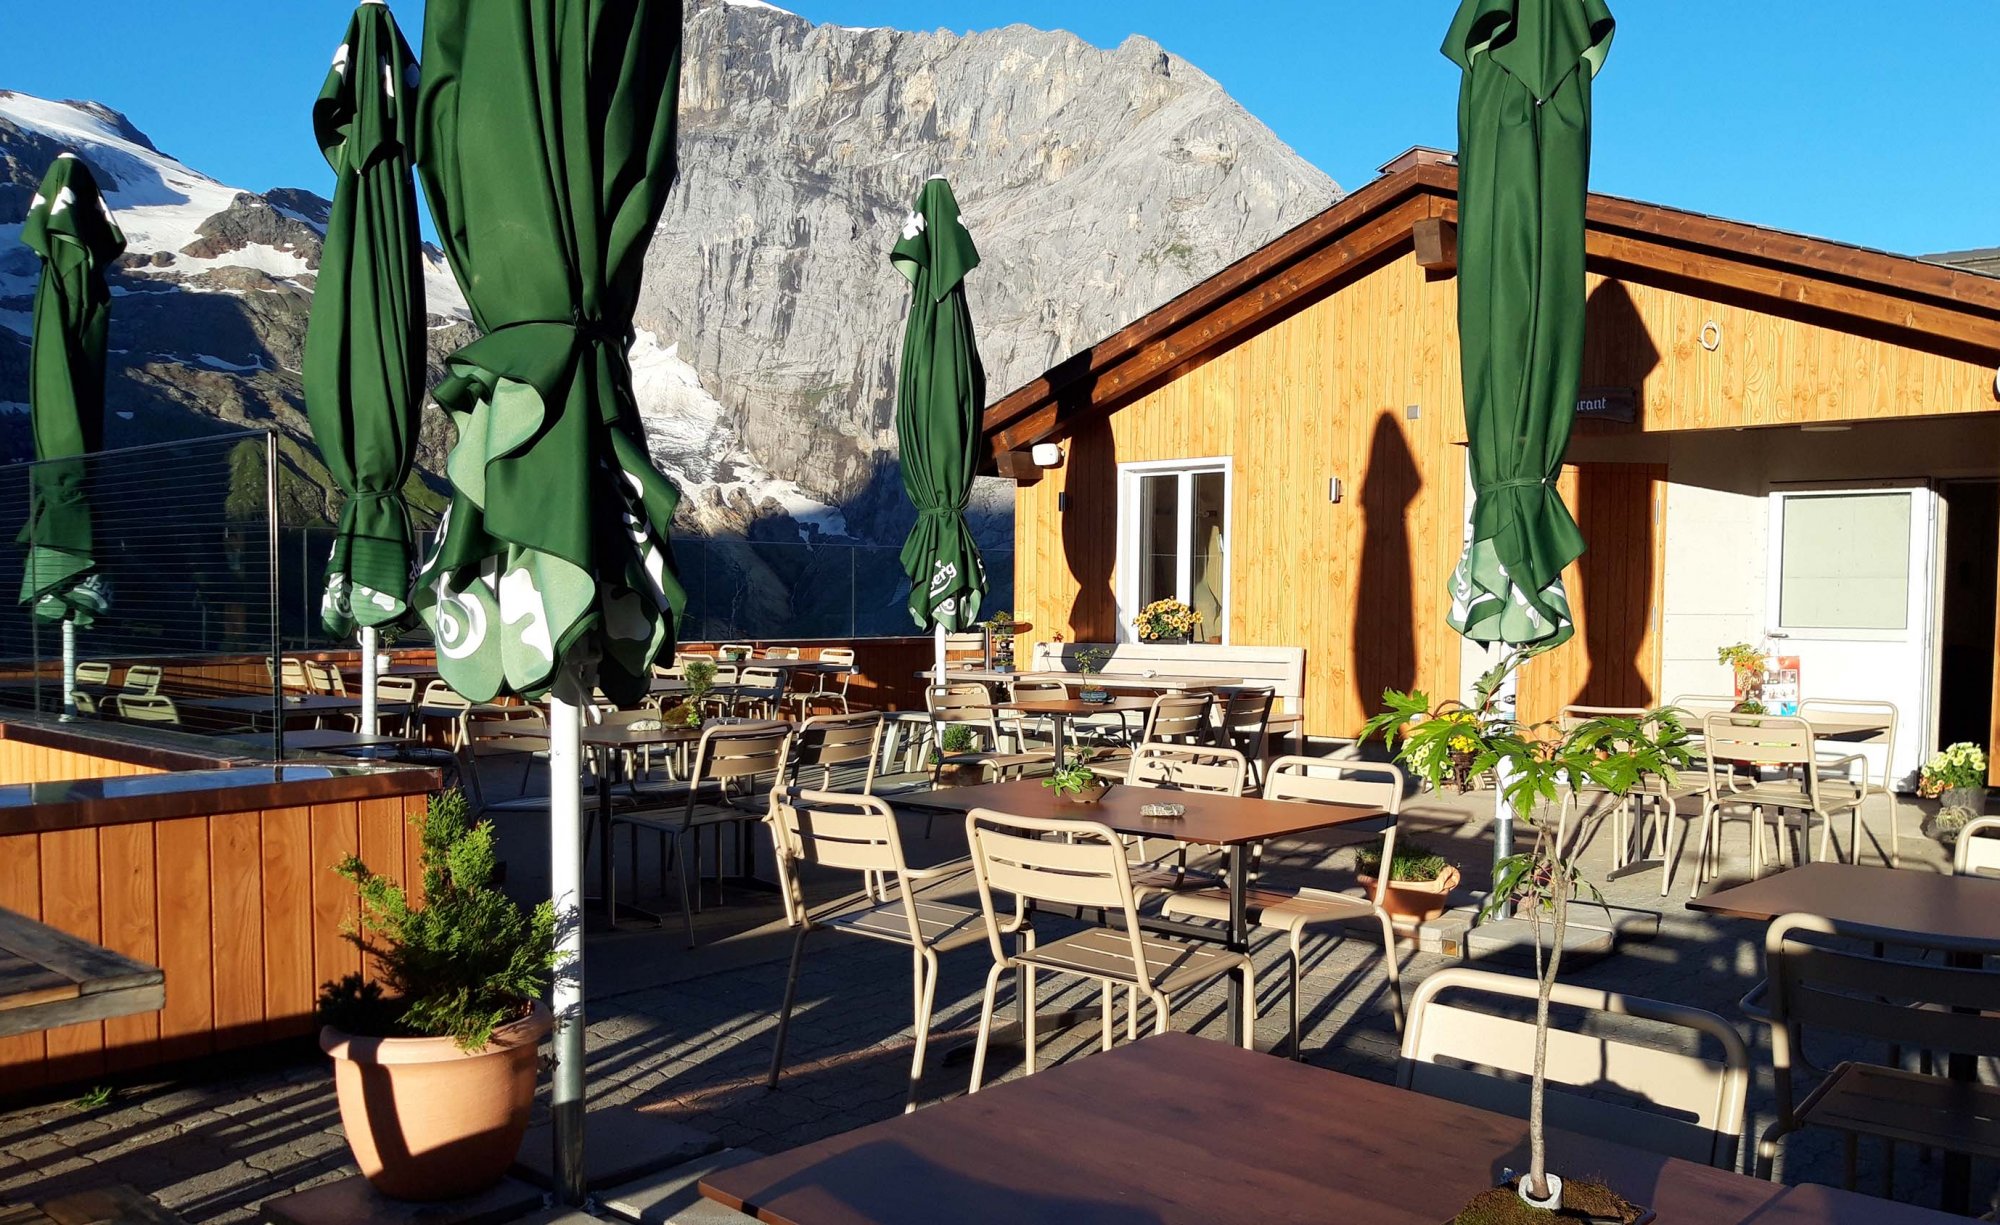 Deeply breathe in the fresh and clear alpine air and relax while enjoying our restaurant on Fürenalp (1850 m above sea level) in Engelberg situated in the middle of a spectacular mountain panorama